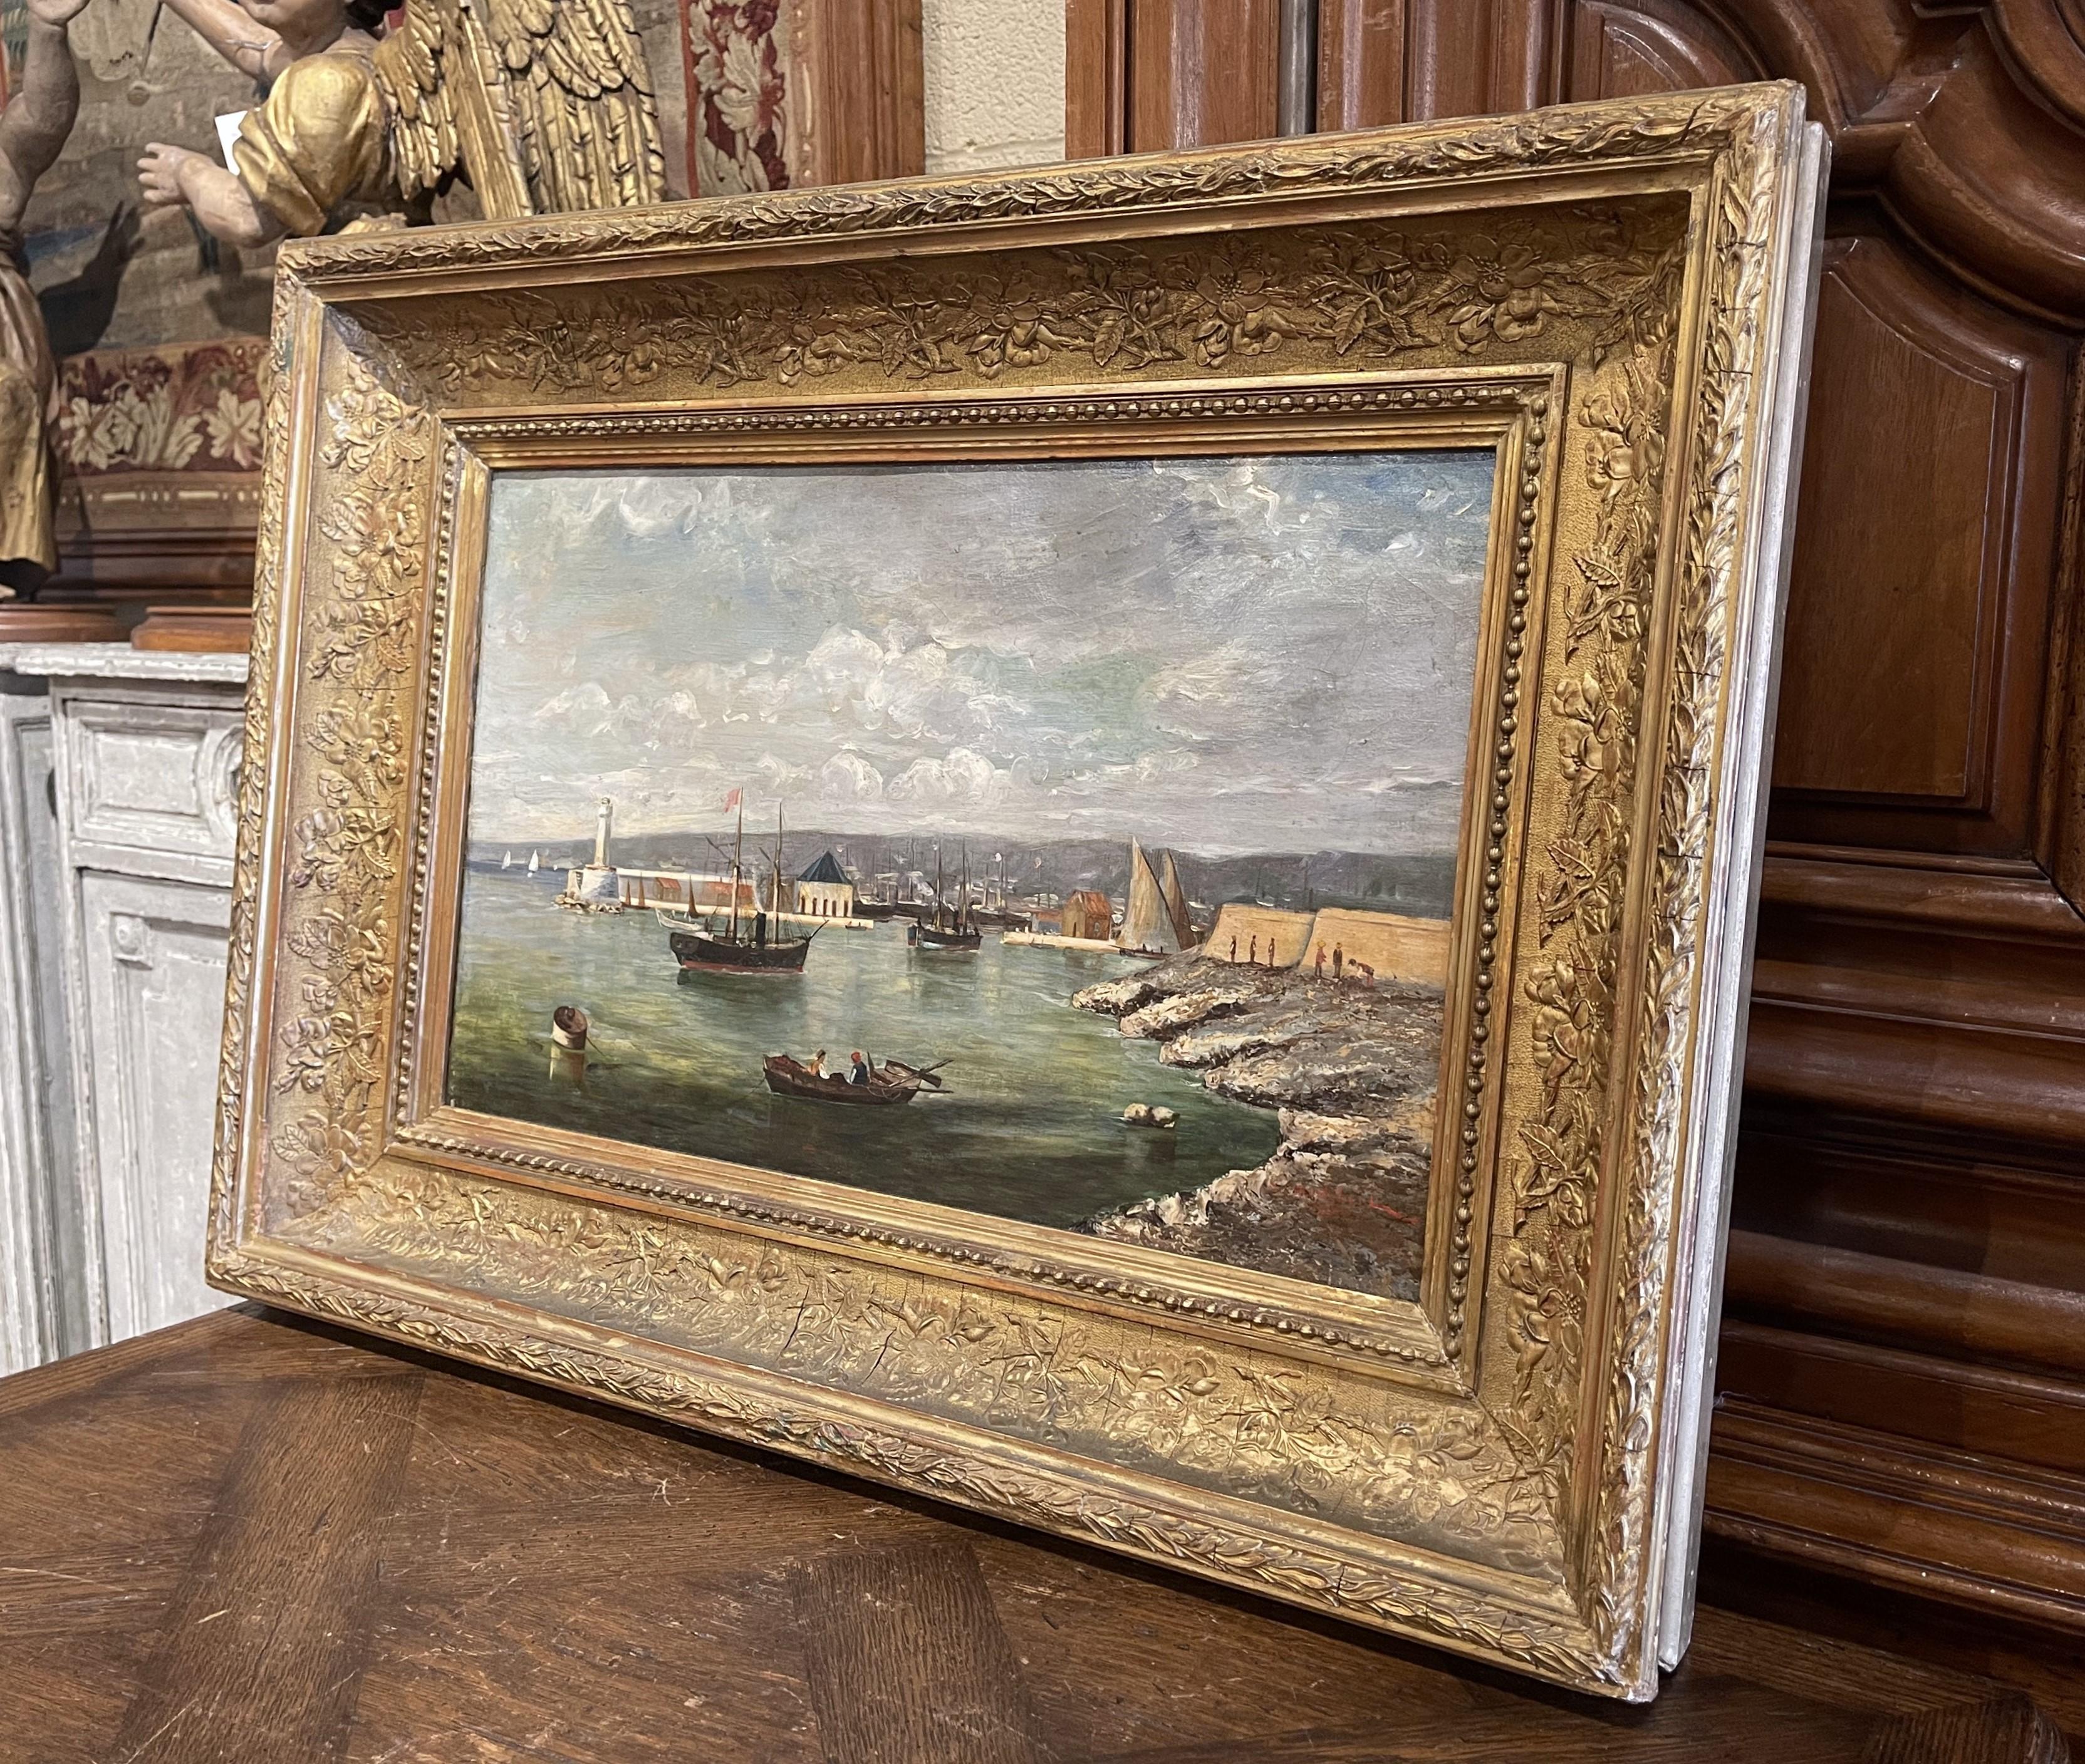  Painted circa 1885, the artwork on canvas is set in the original carved gilt wood frame; the scene illustrates the picturesque, ocean-front landscape of the 